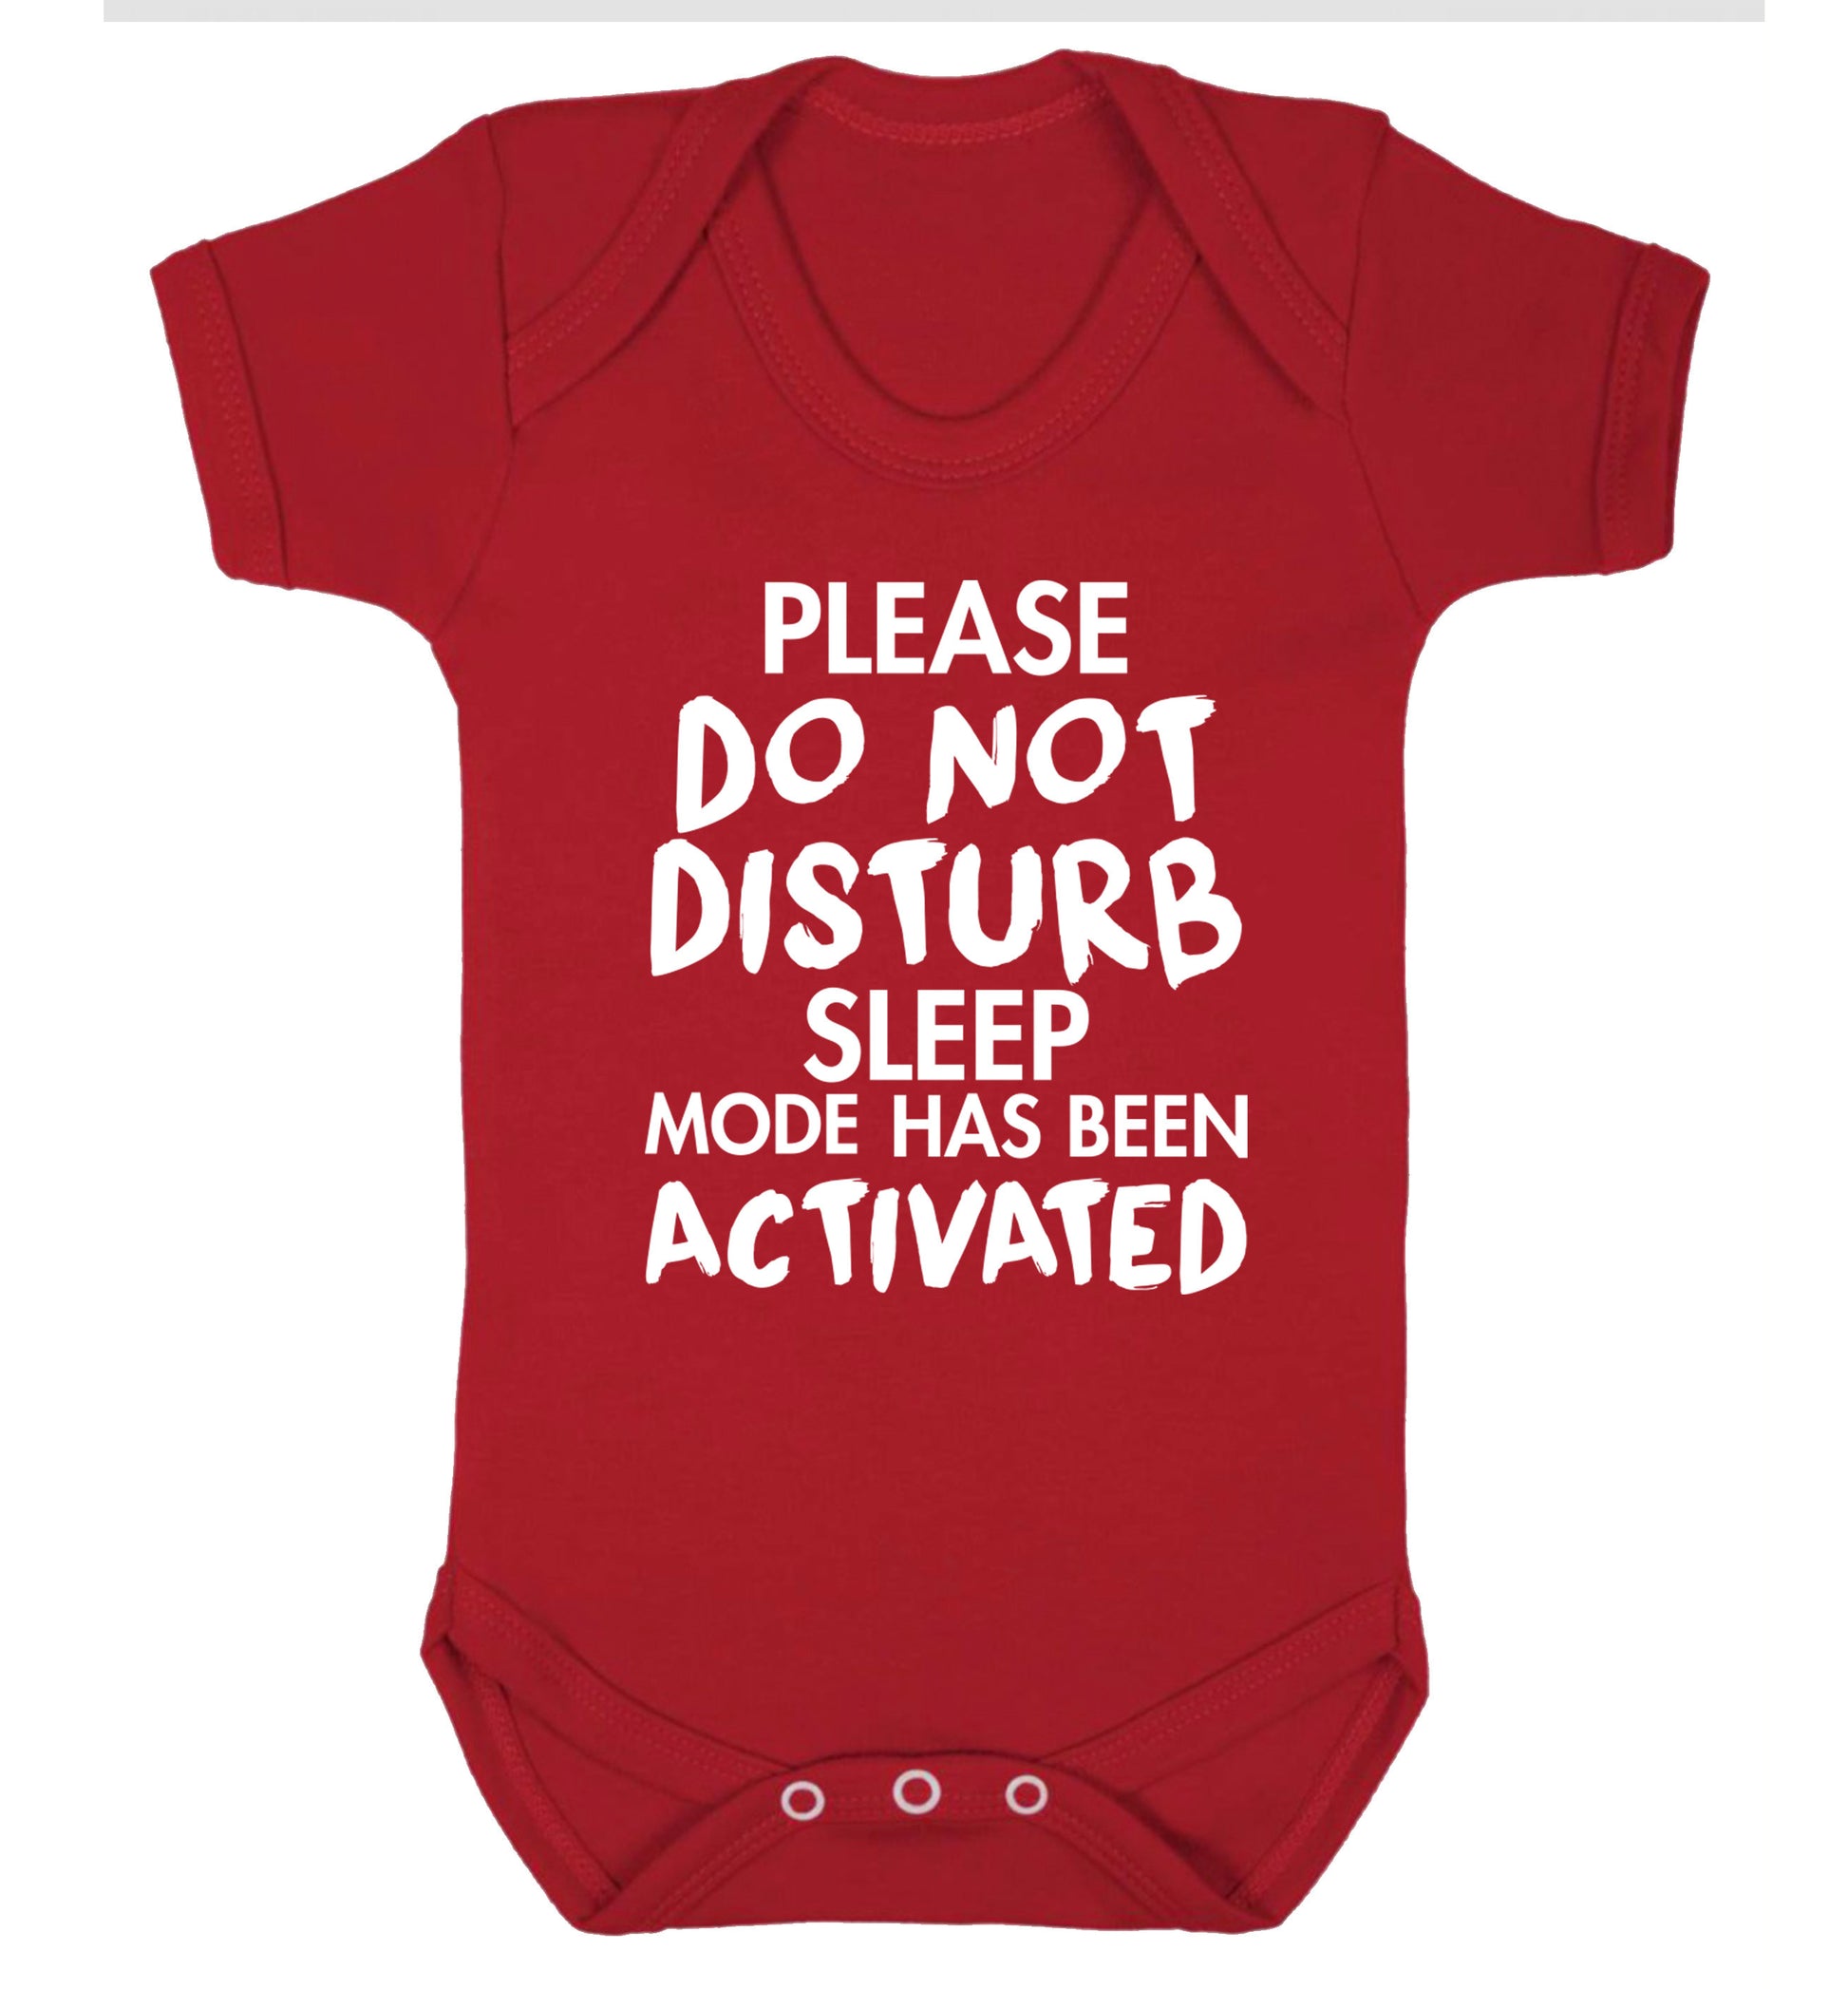 Please do not disturb sleeping mode has been activated Baby Vest red 18-24 months